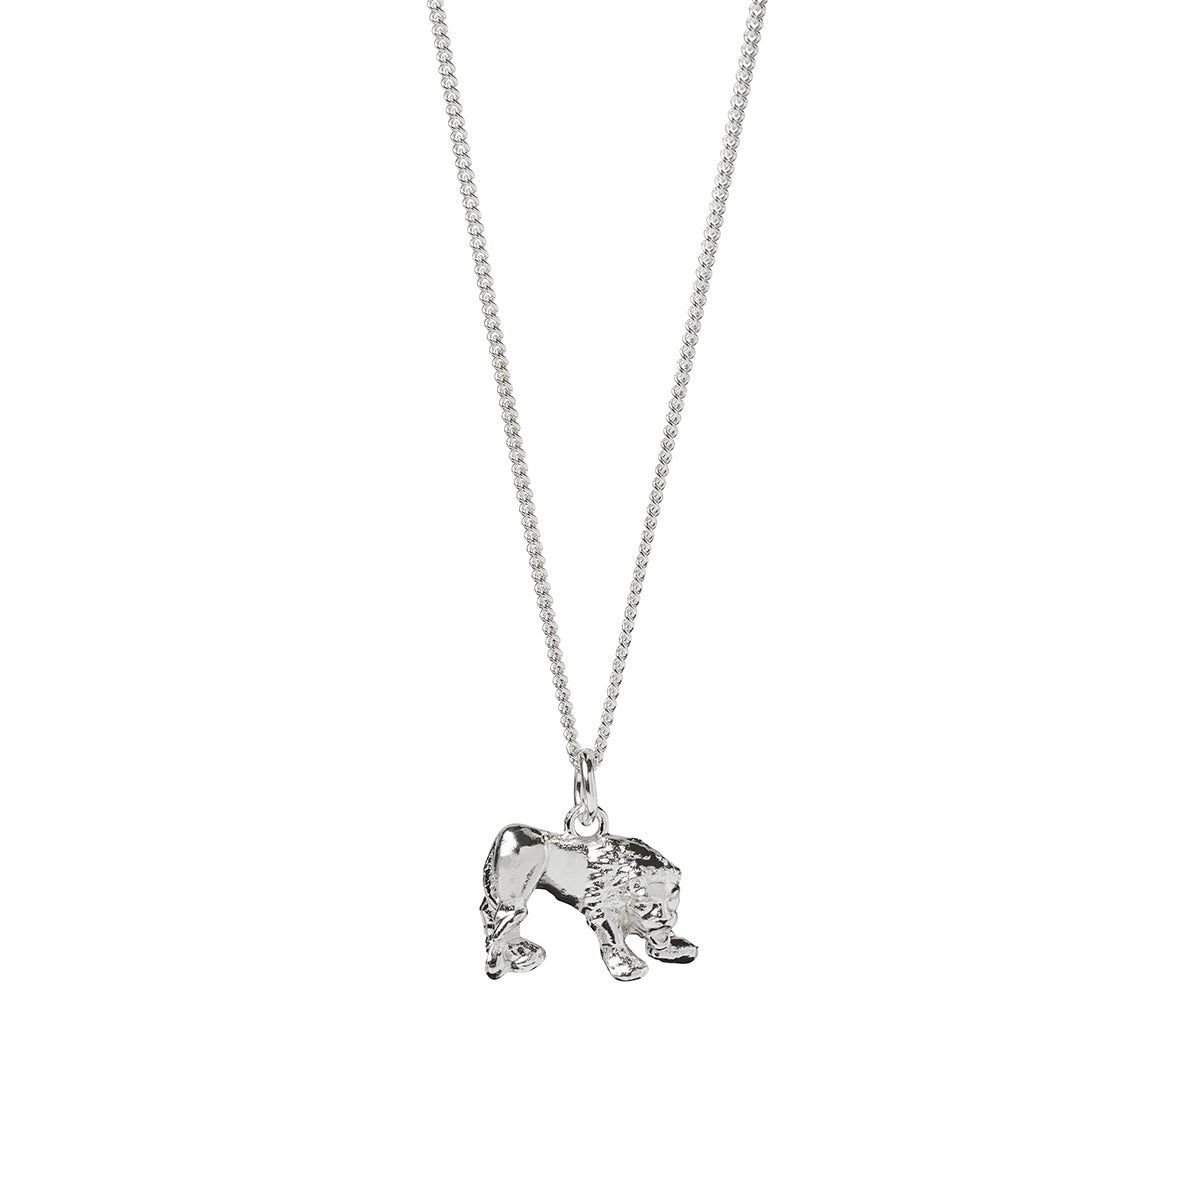 A silver lion pendant based on the Corbridge Lion statue found at Corstopitum Corbridge Roman Site in Northumberland, handmade by Kirsty Taylor Goldsmiths in Corbrige